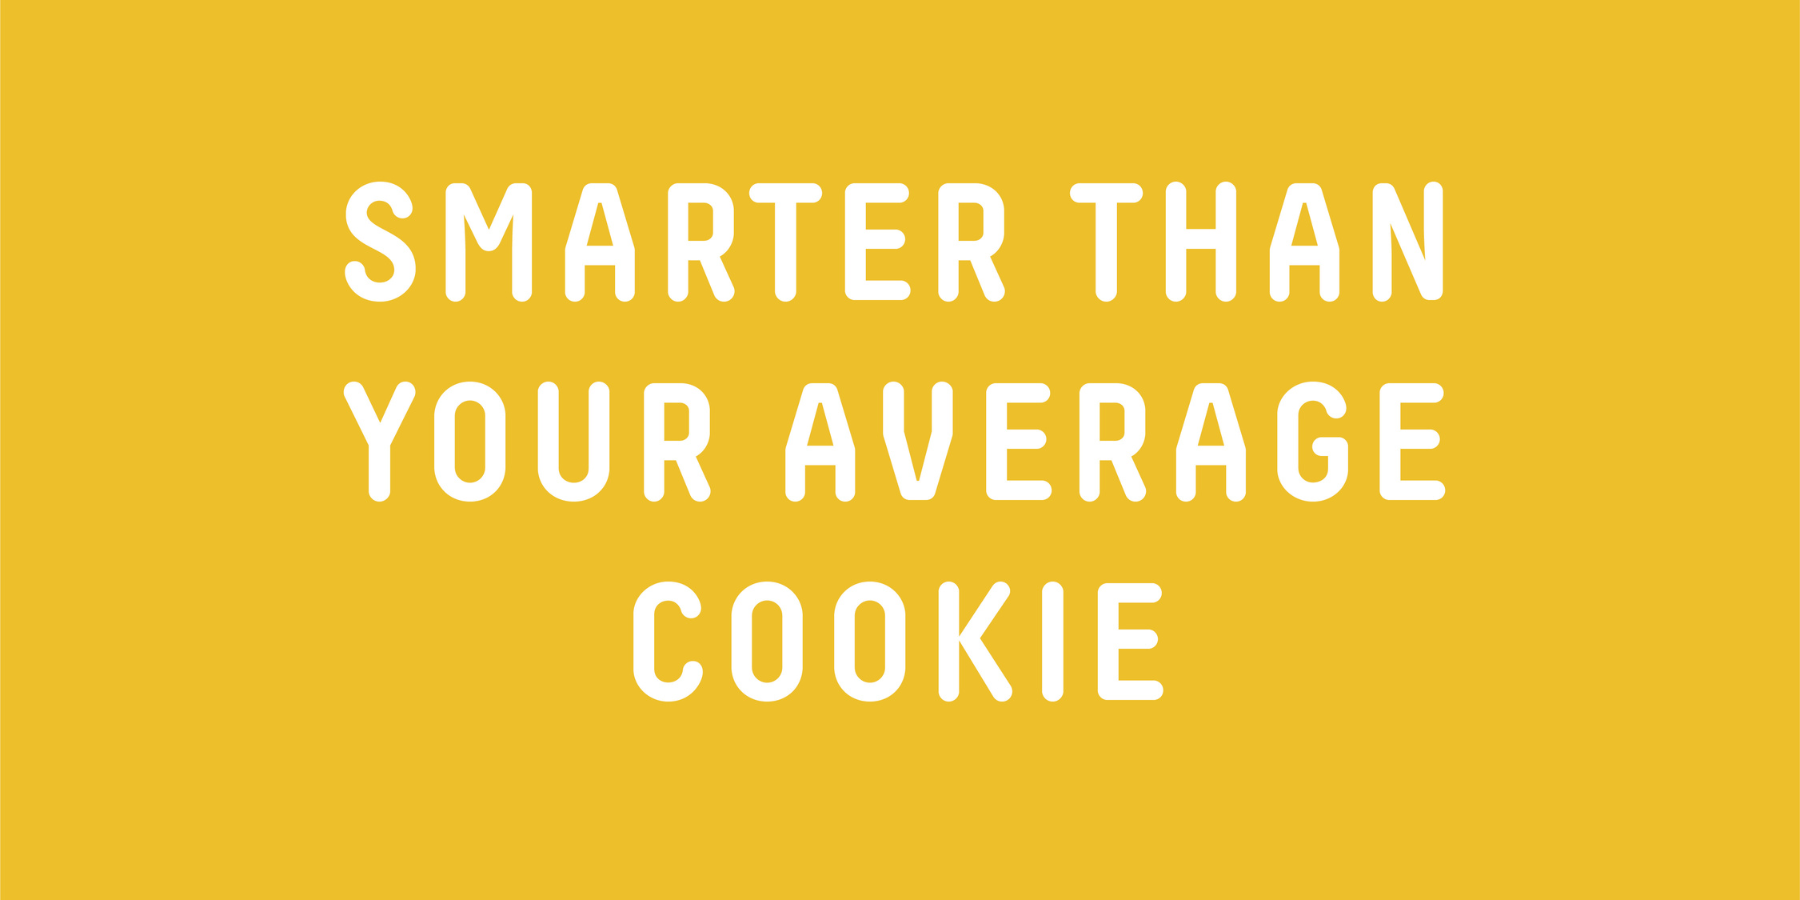 Wisefoods | Wise Cookie byline "Smarter than your average cookie" on a mustard yellow background